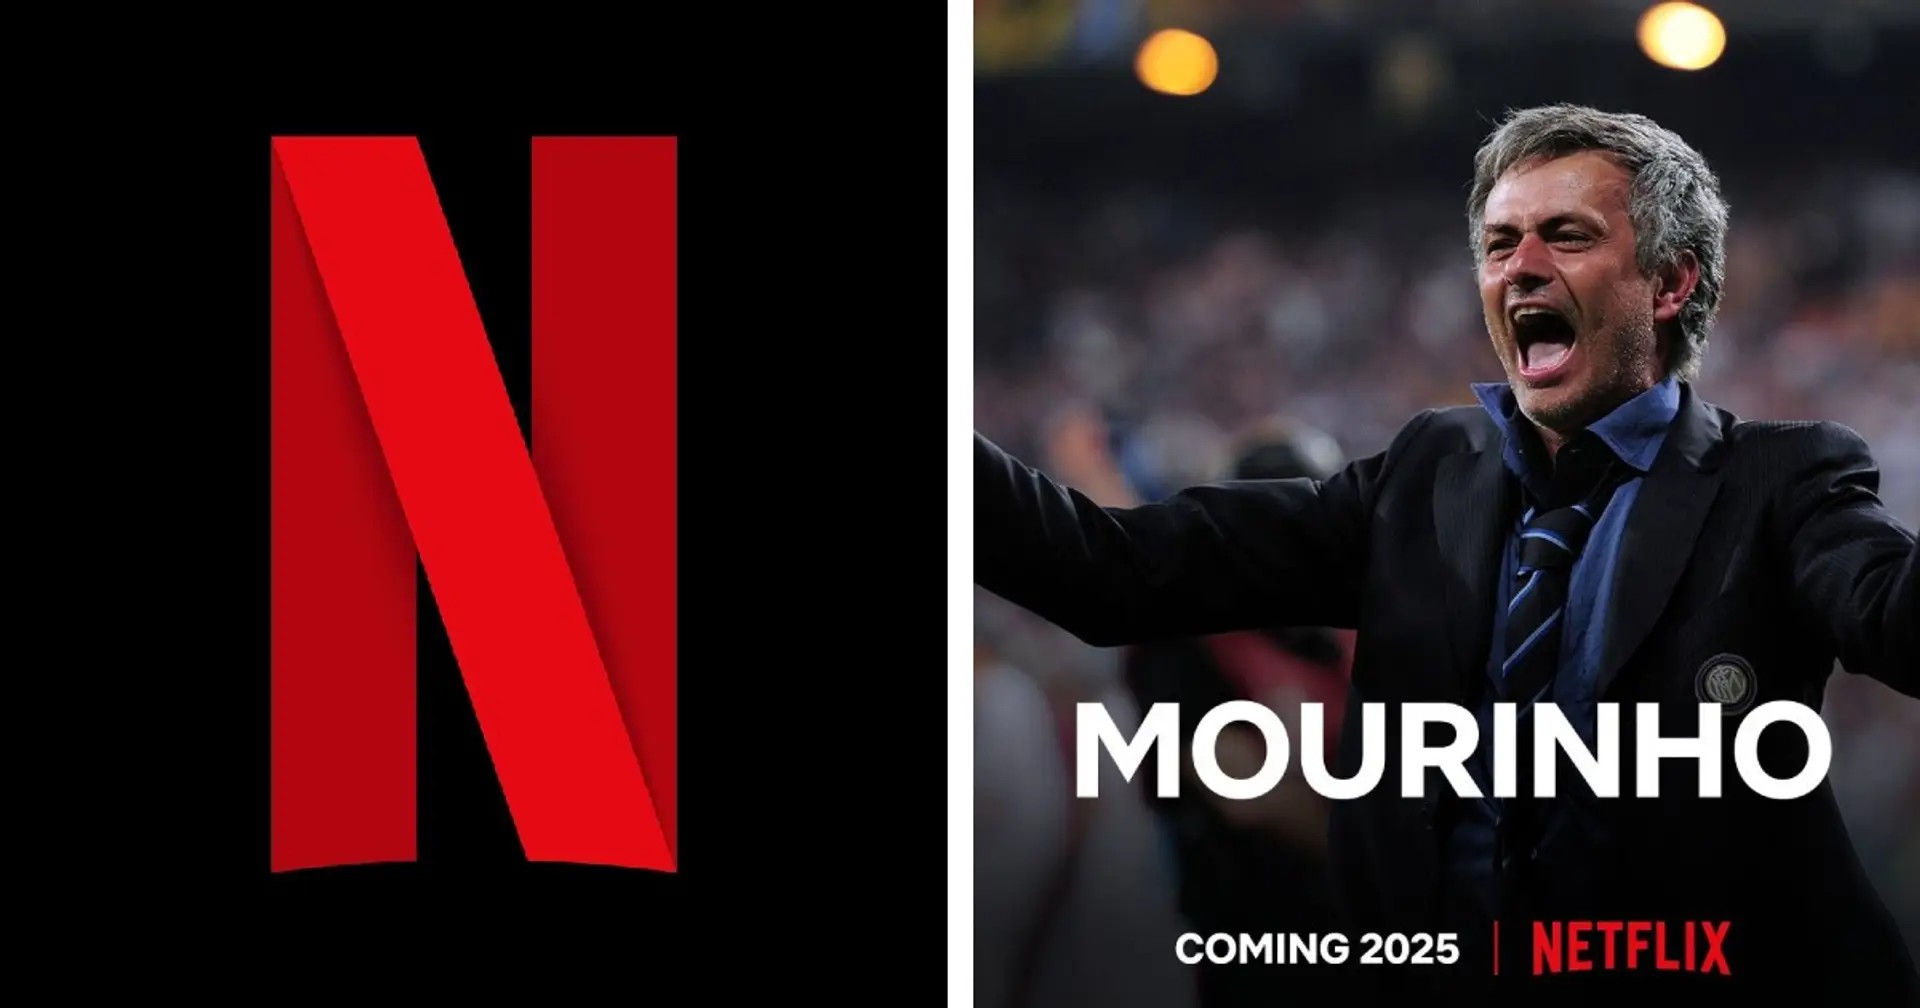 Netflix to release documentary about Mourinho in 2025